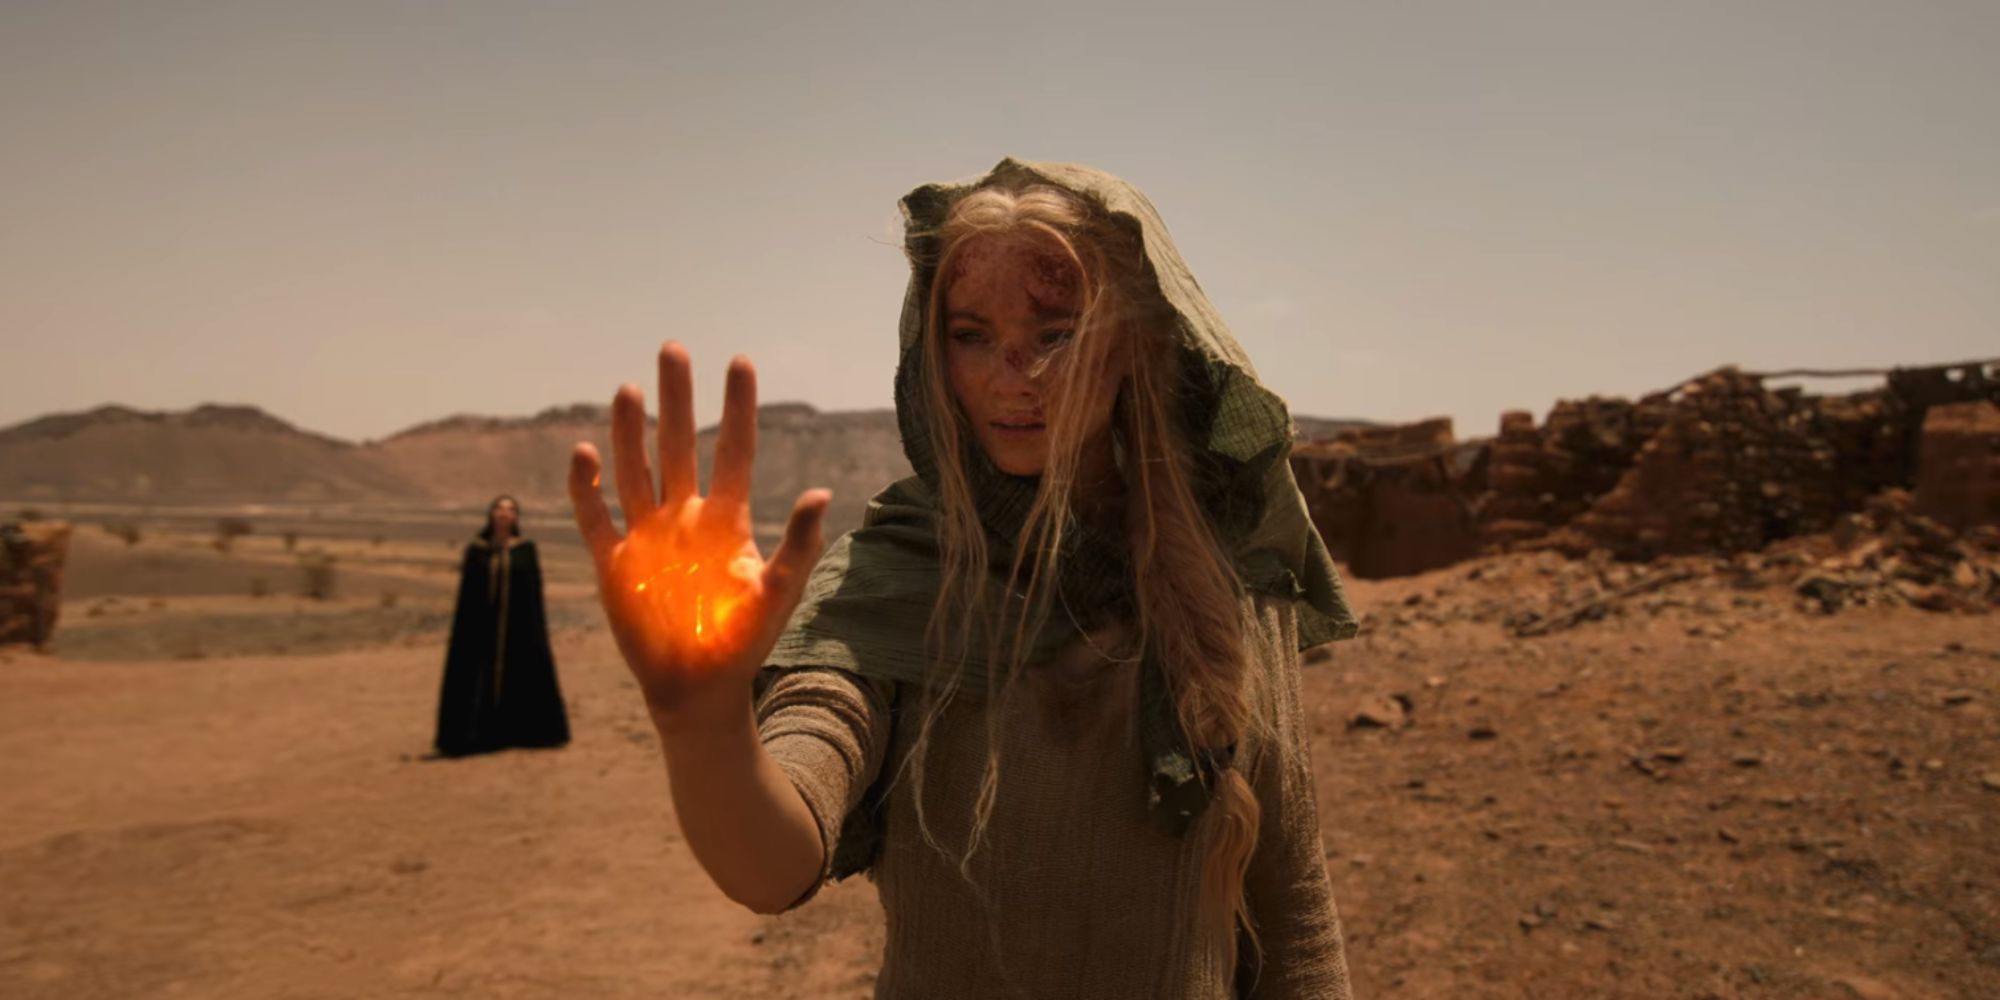 Still of Ciri in the desert summoning fire magic in her hand in The Witcher season 3